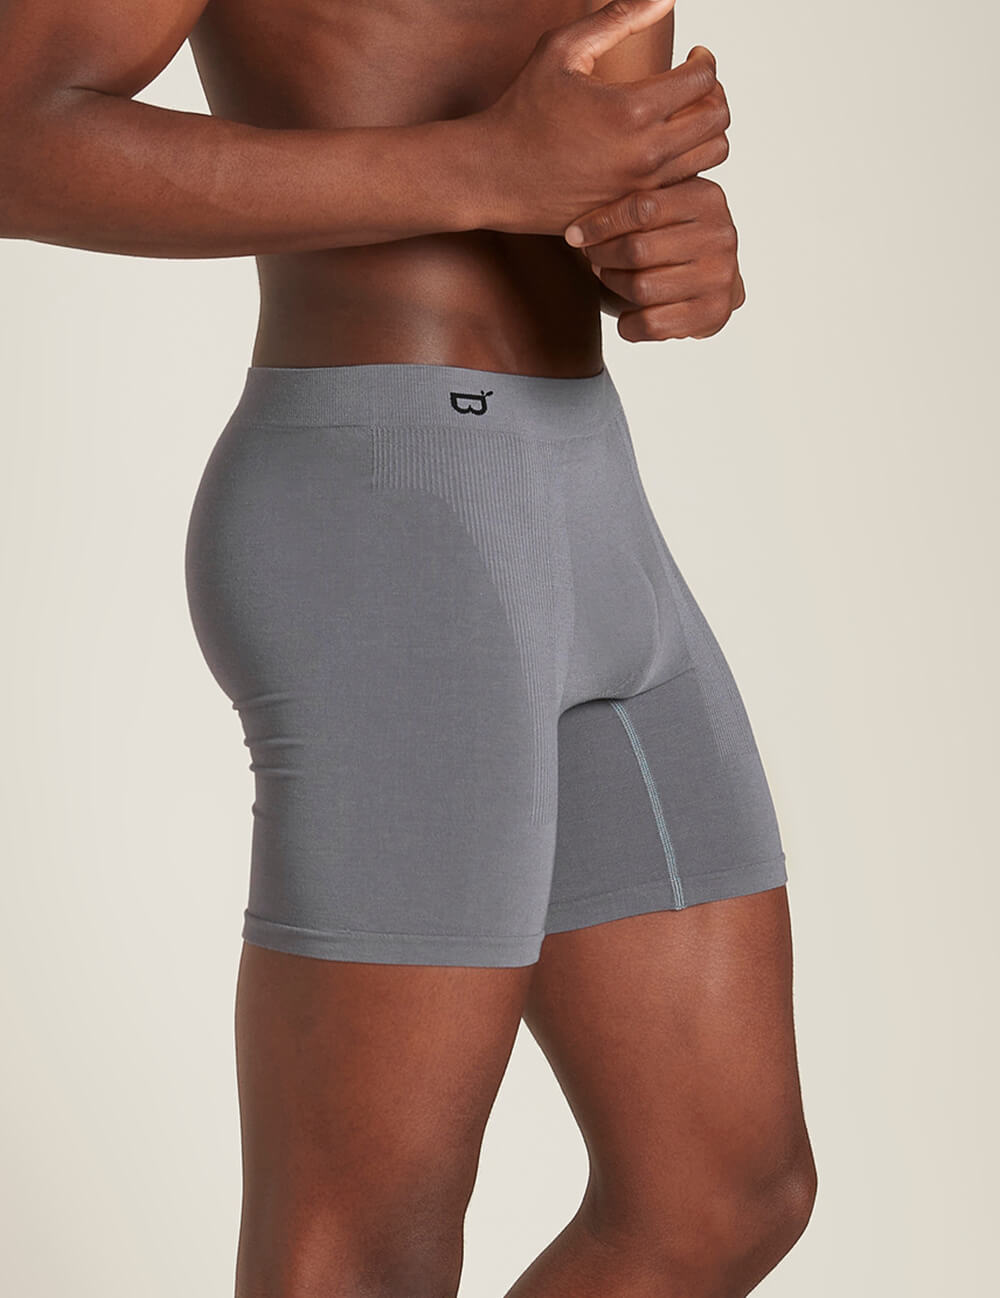 Boody Bamboo Mens Original Long Boxer in Charcoal Grey Side View 2